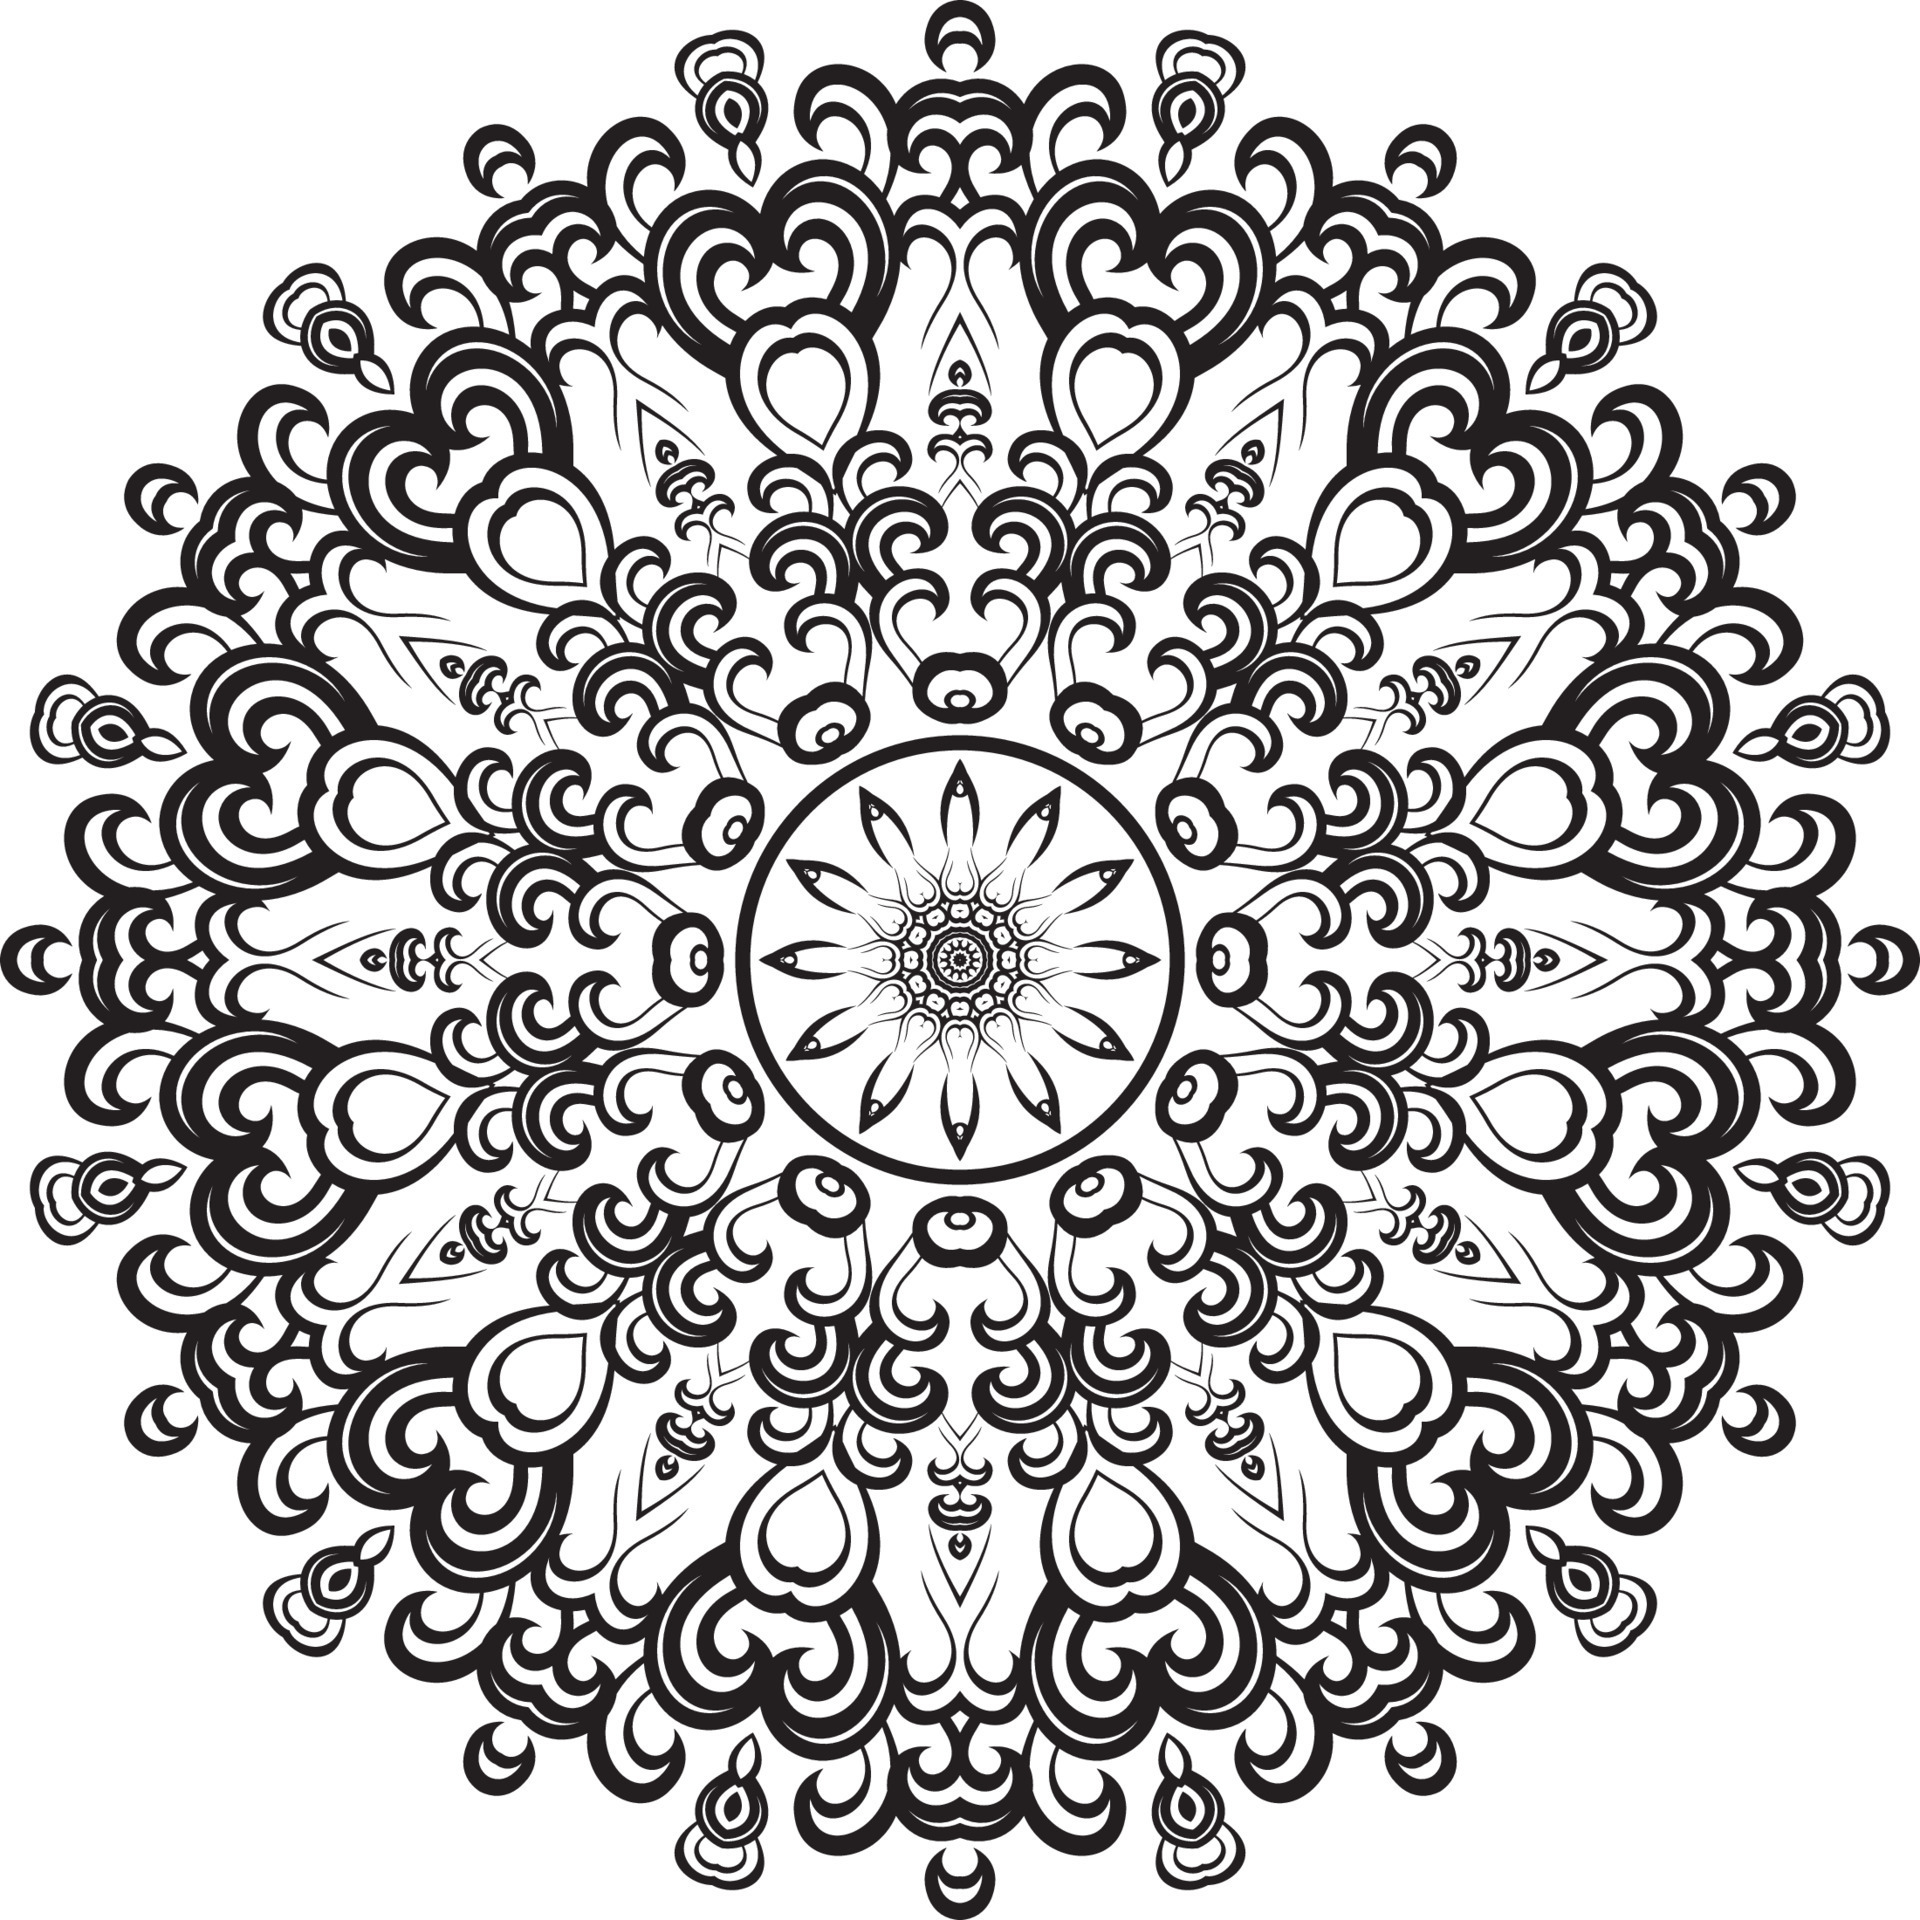 https://static.vecteezy.com/system/resources/previews/013/975/394/original/the-ornamental-mandala-with-flowers-for-henna-mehndi-tattoo-and-decoration-decorative-ornament-in-ethnic-oriental-style-outline-doodle-hand-draw-illustration-free-vector.jpg